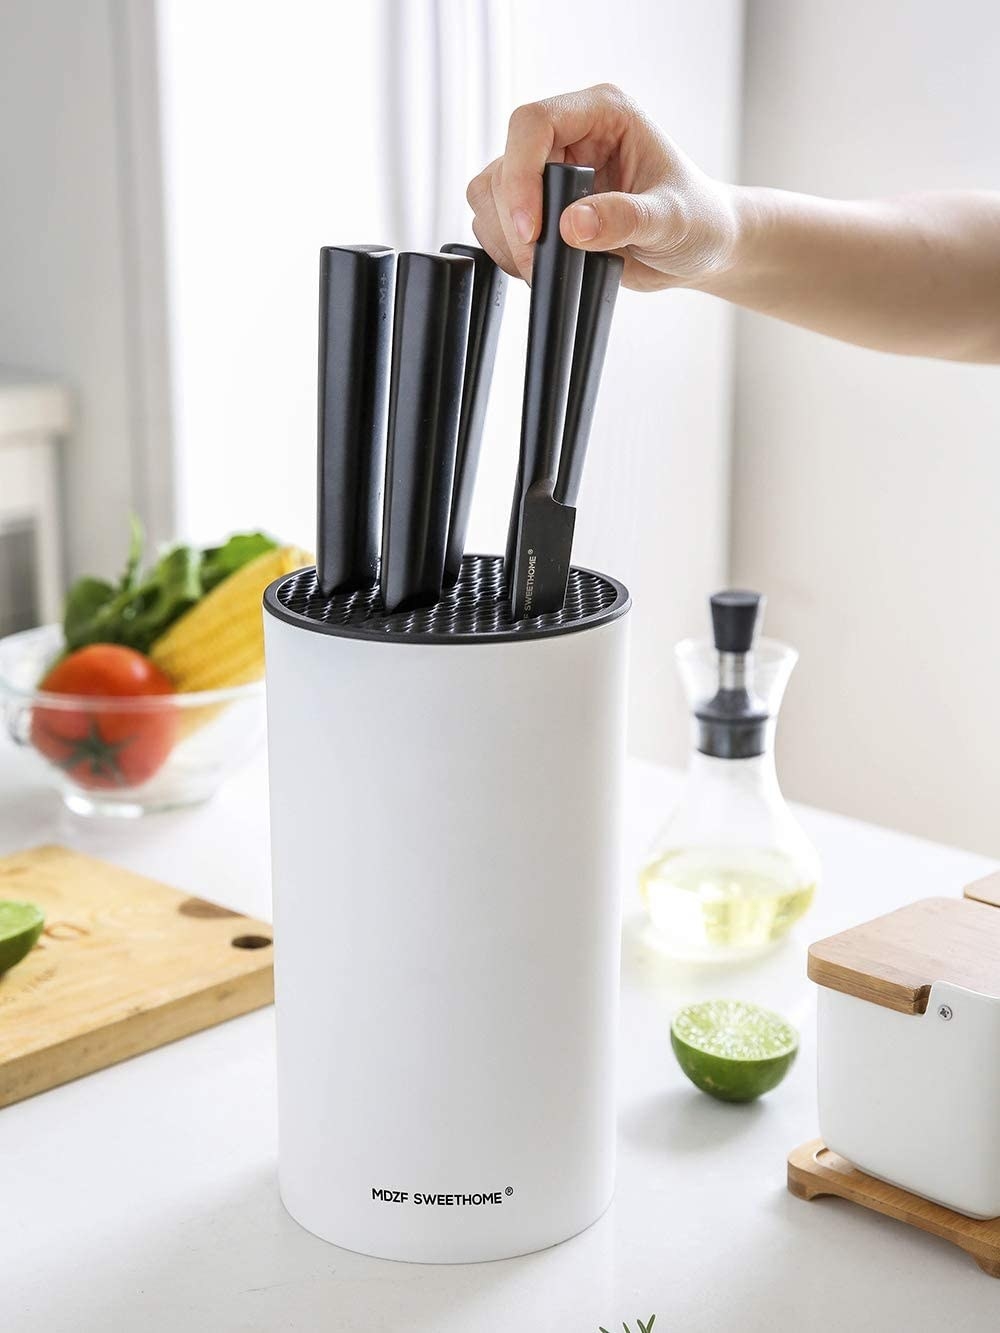 a person removing a knife from the universal knife block